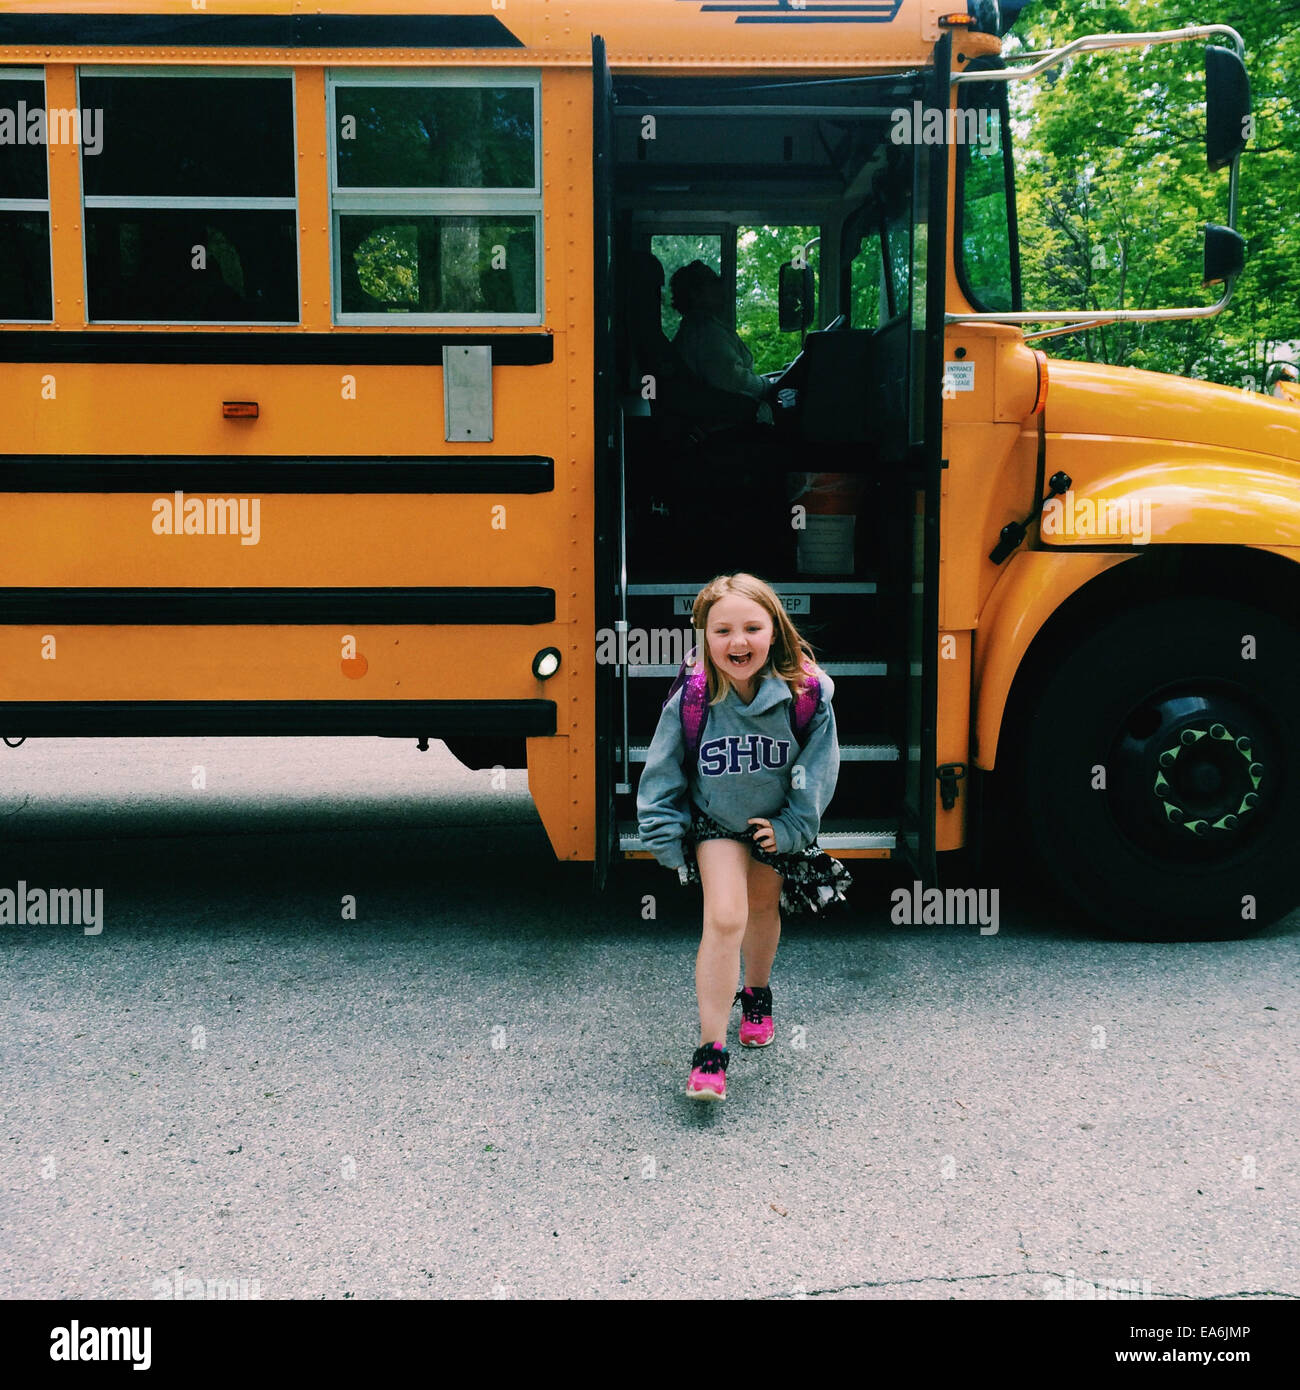 Smiling Girl getting off school bus, Wisconsin, United States Stock Photo